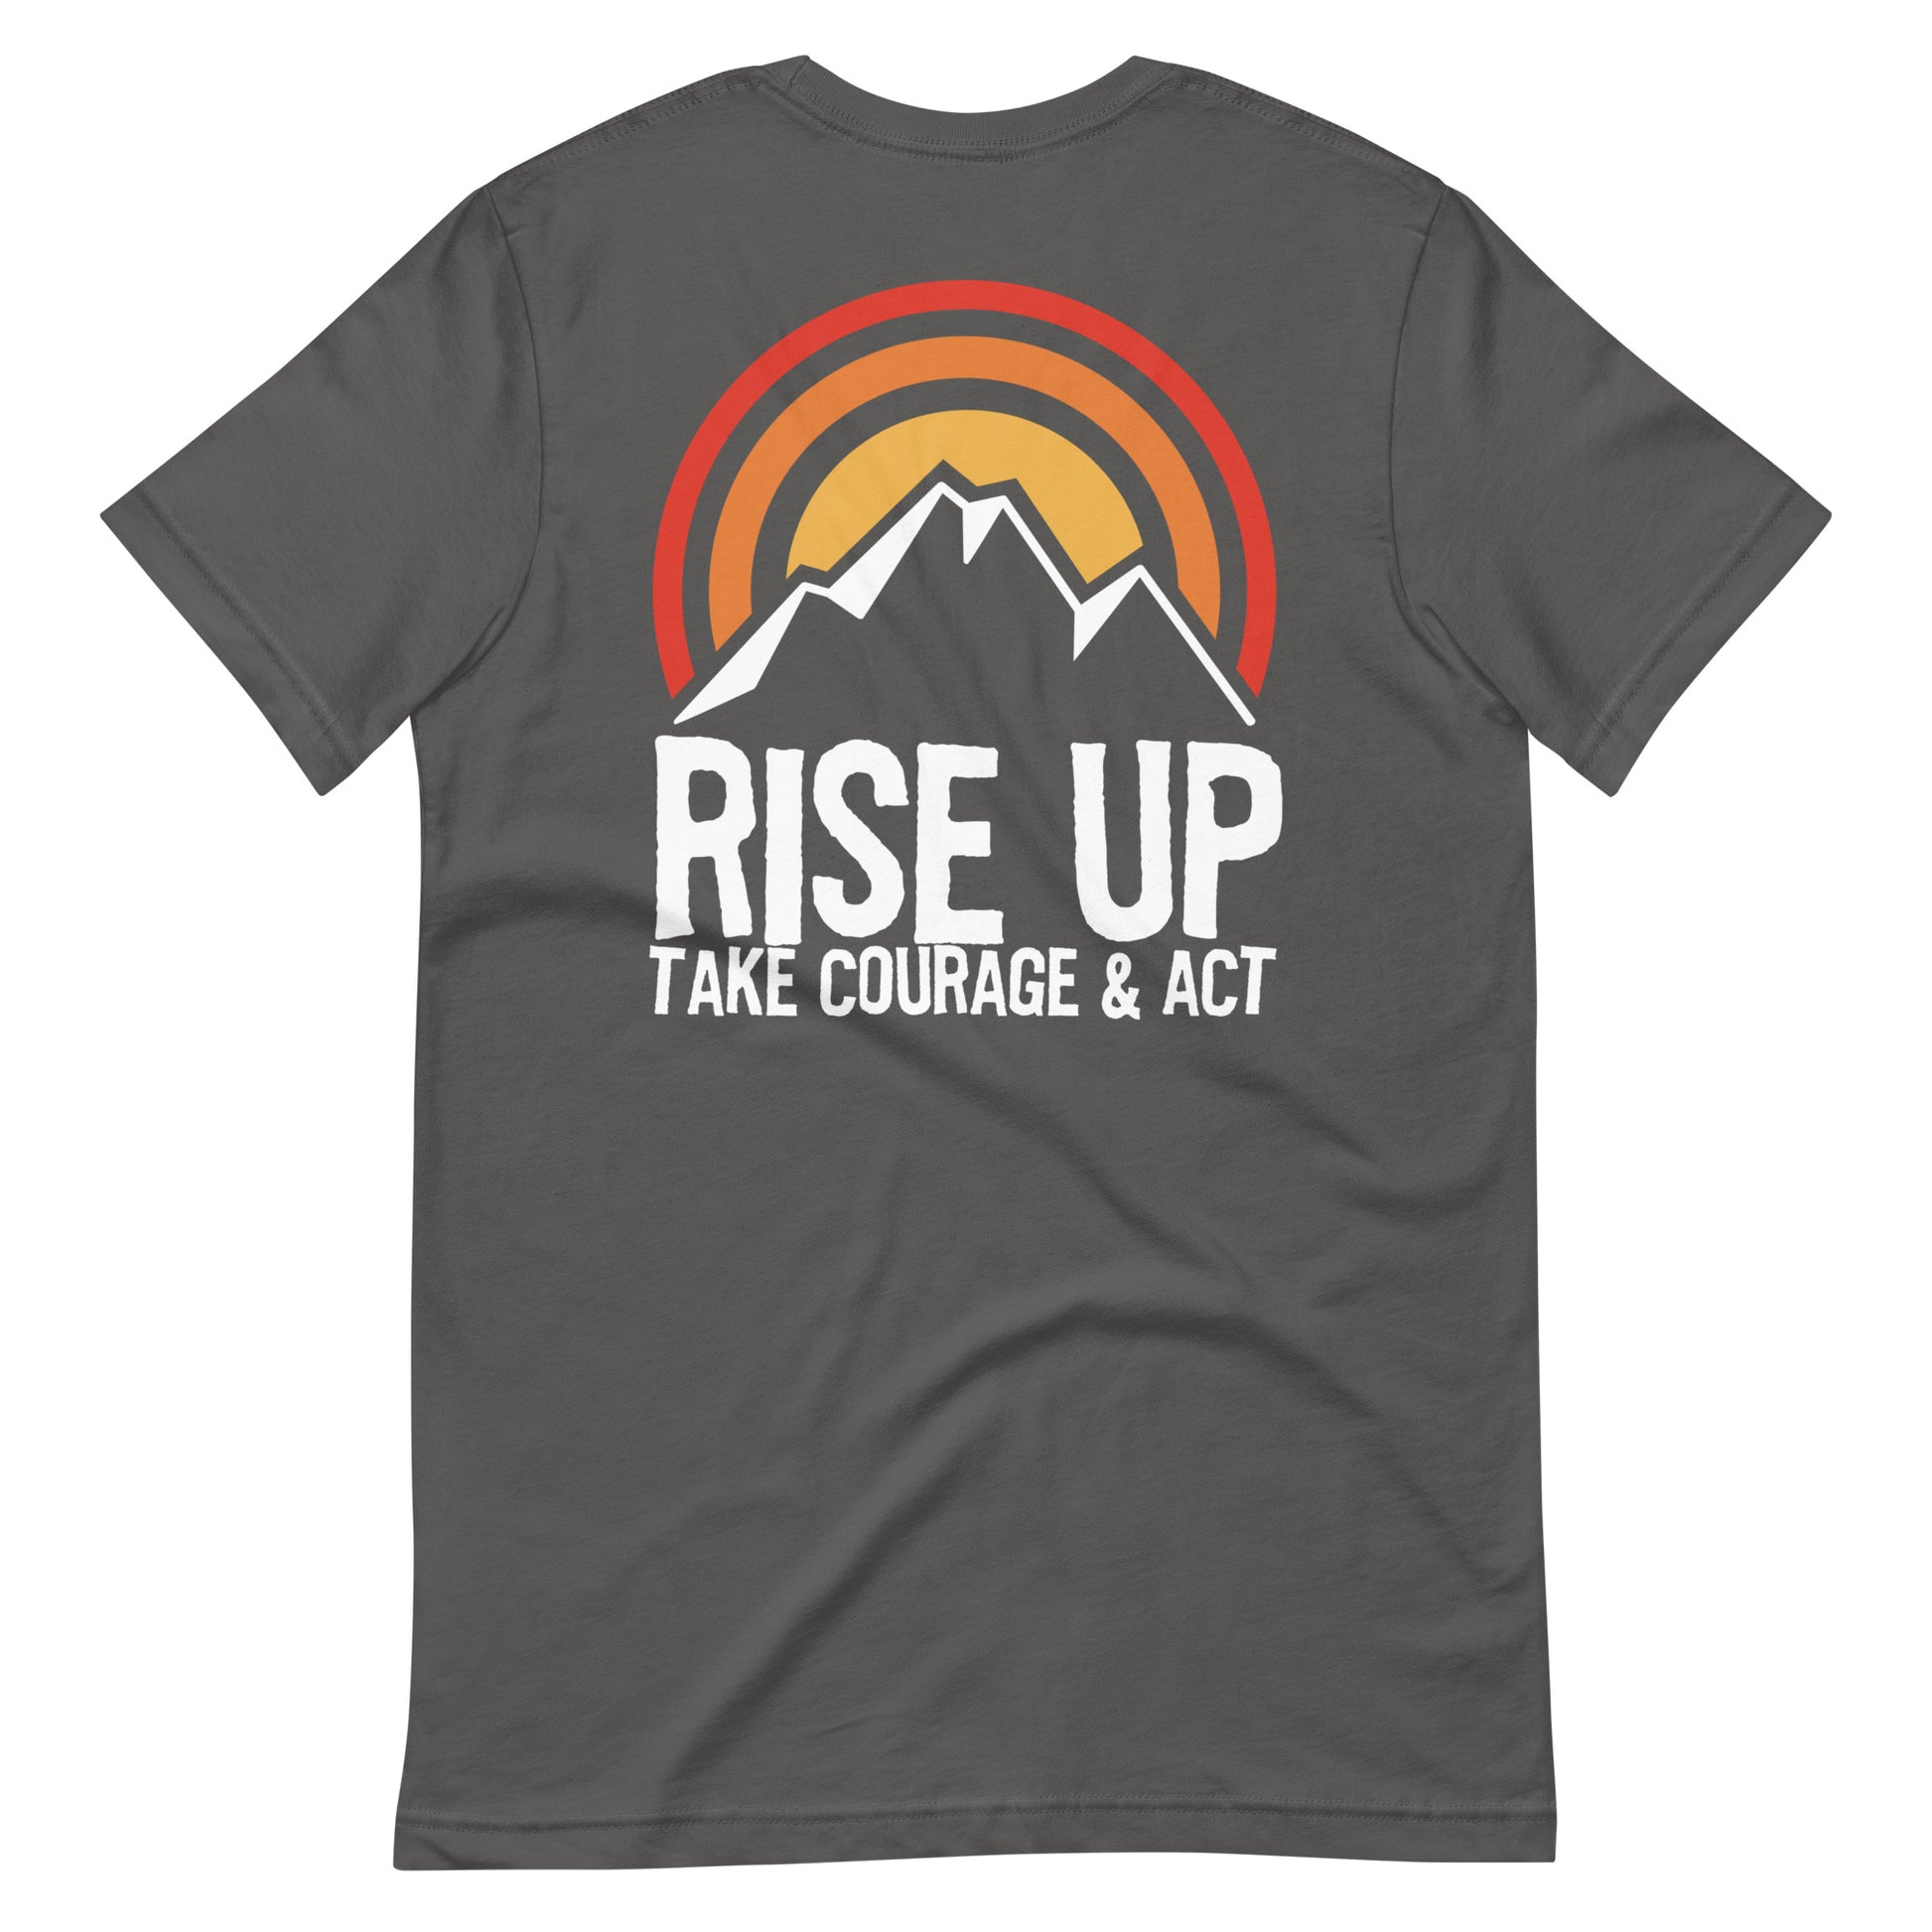 Rise Up! - For Your Courage